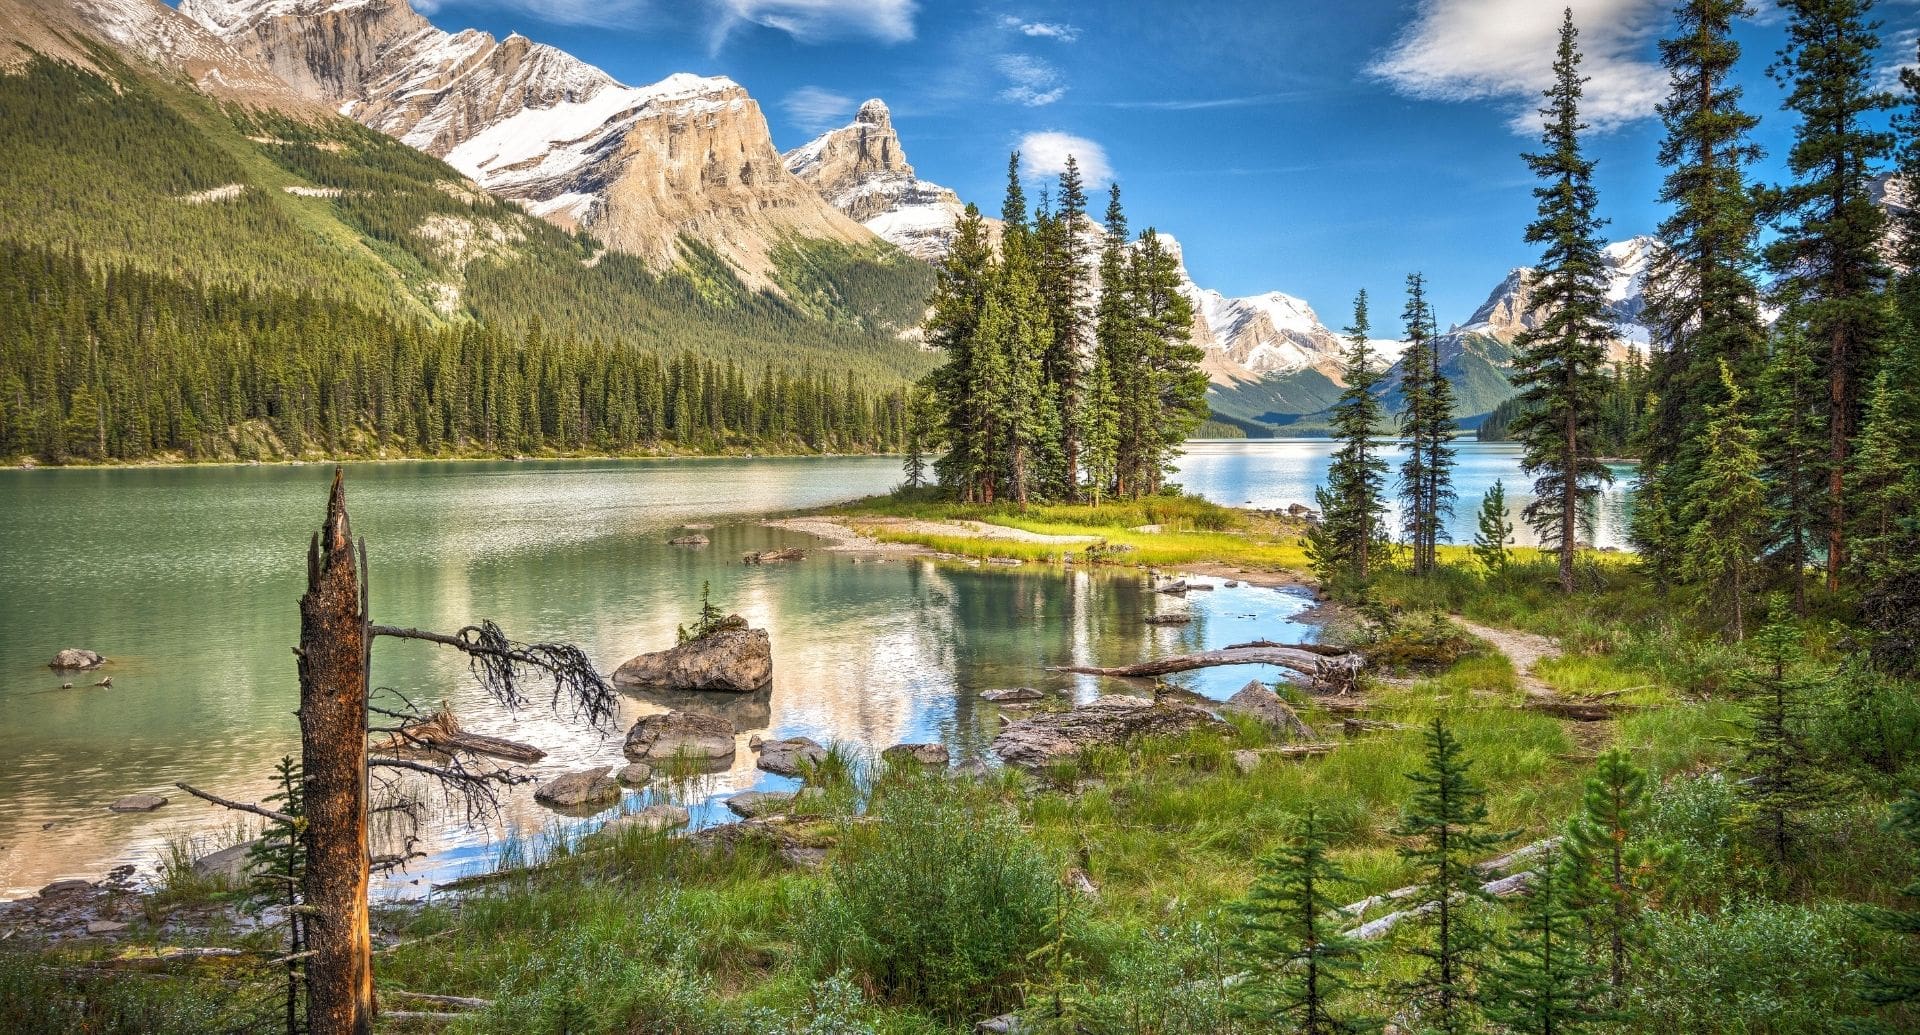 One of the most beautiful Jasper National Park Lakes